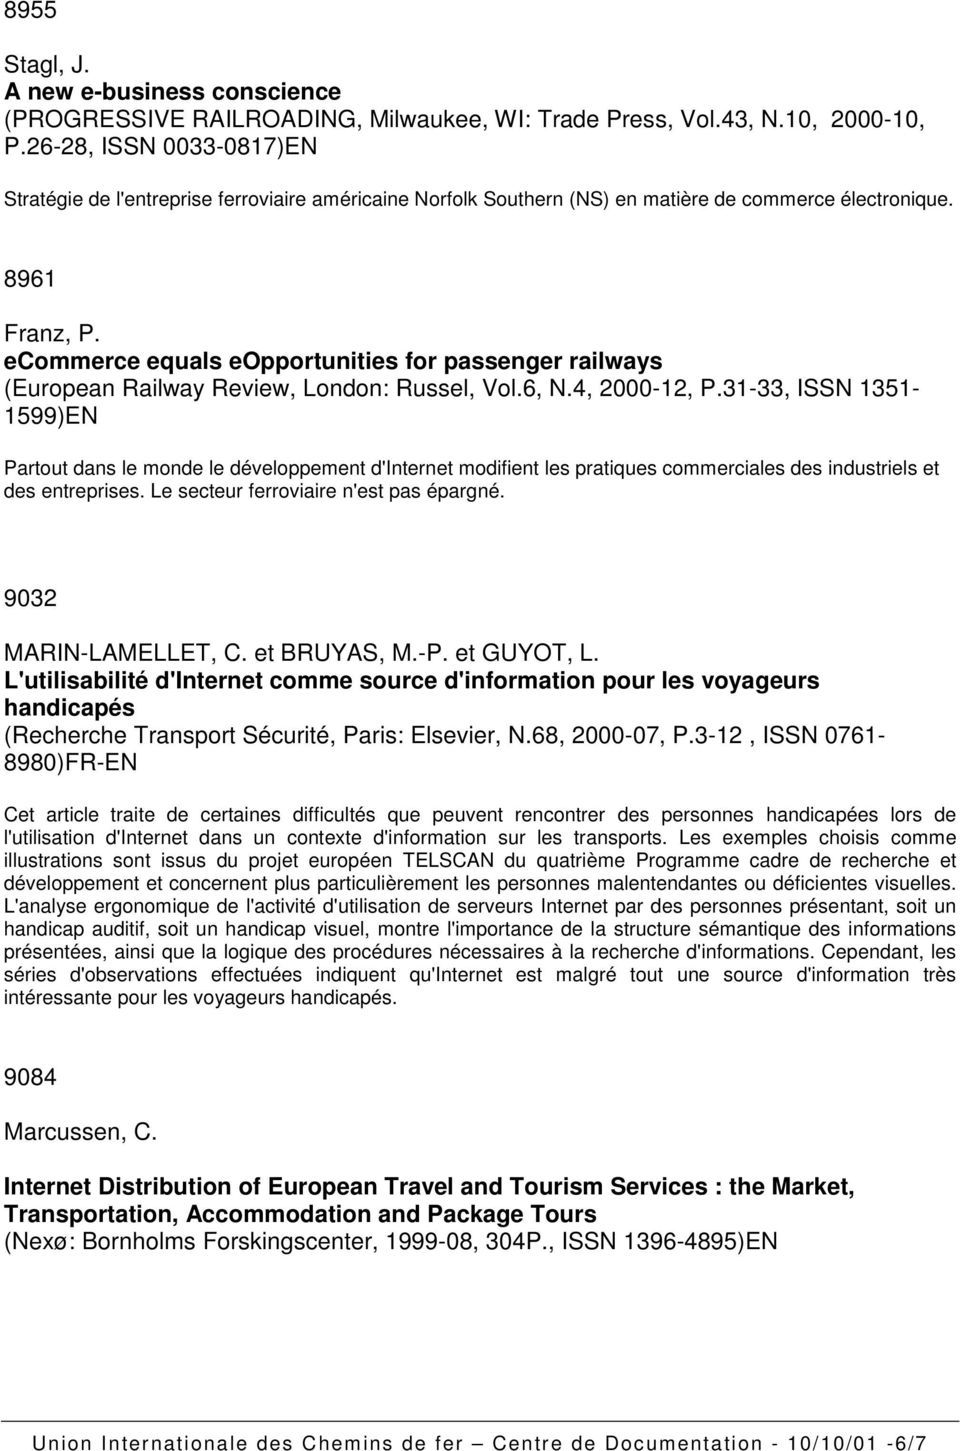 ecommerce equals eopportunities for passenger railways (European Railway Review, London: Russel, Vol.6, N.4, 2000-12, P.